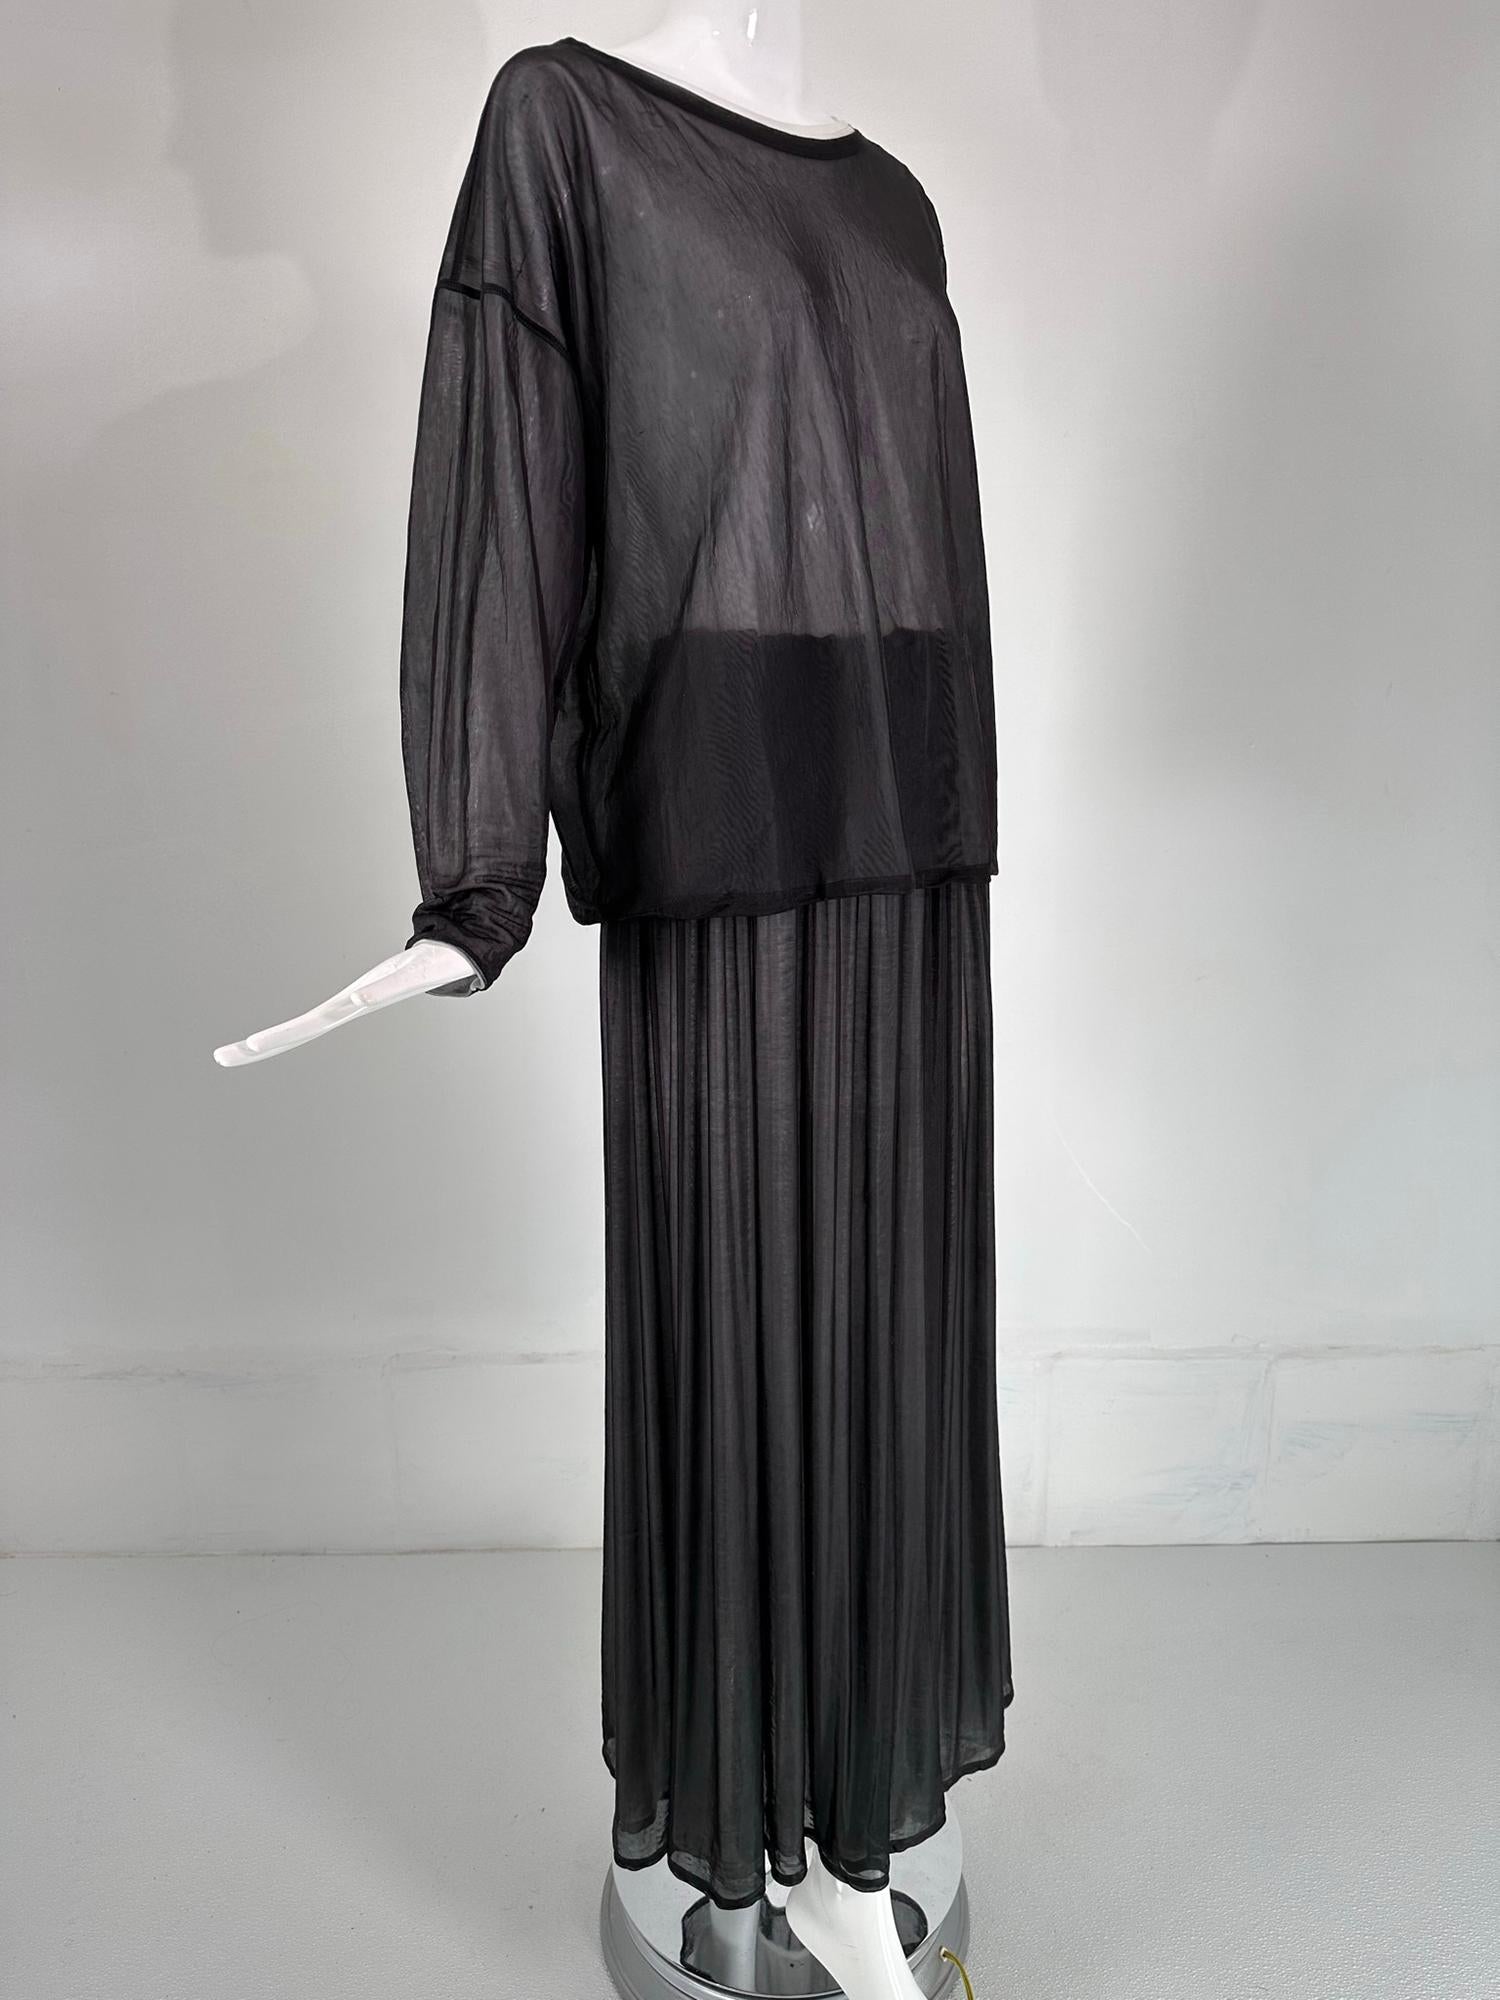 Dolce & Gabbana sheer black & white nylon athleisure oversize top & elastic waist gathered maxi skirt. 
Black lined in white top & skirt are sheer but not totally see through. Round neck top has long  dropped shoulder sleeves and layered oversize